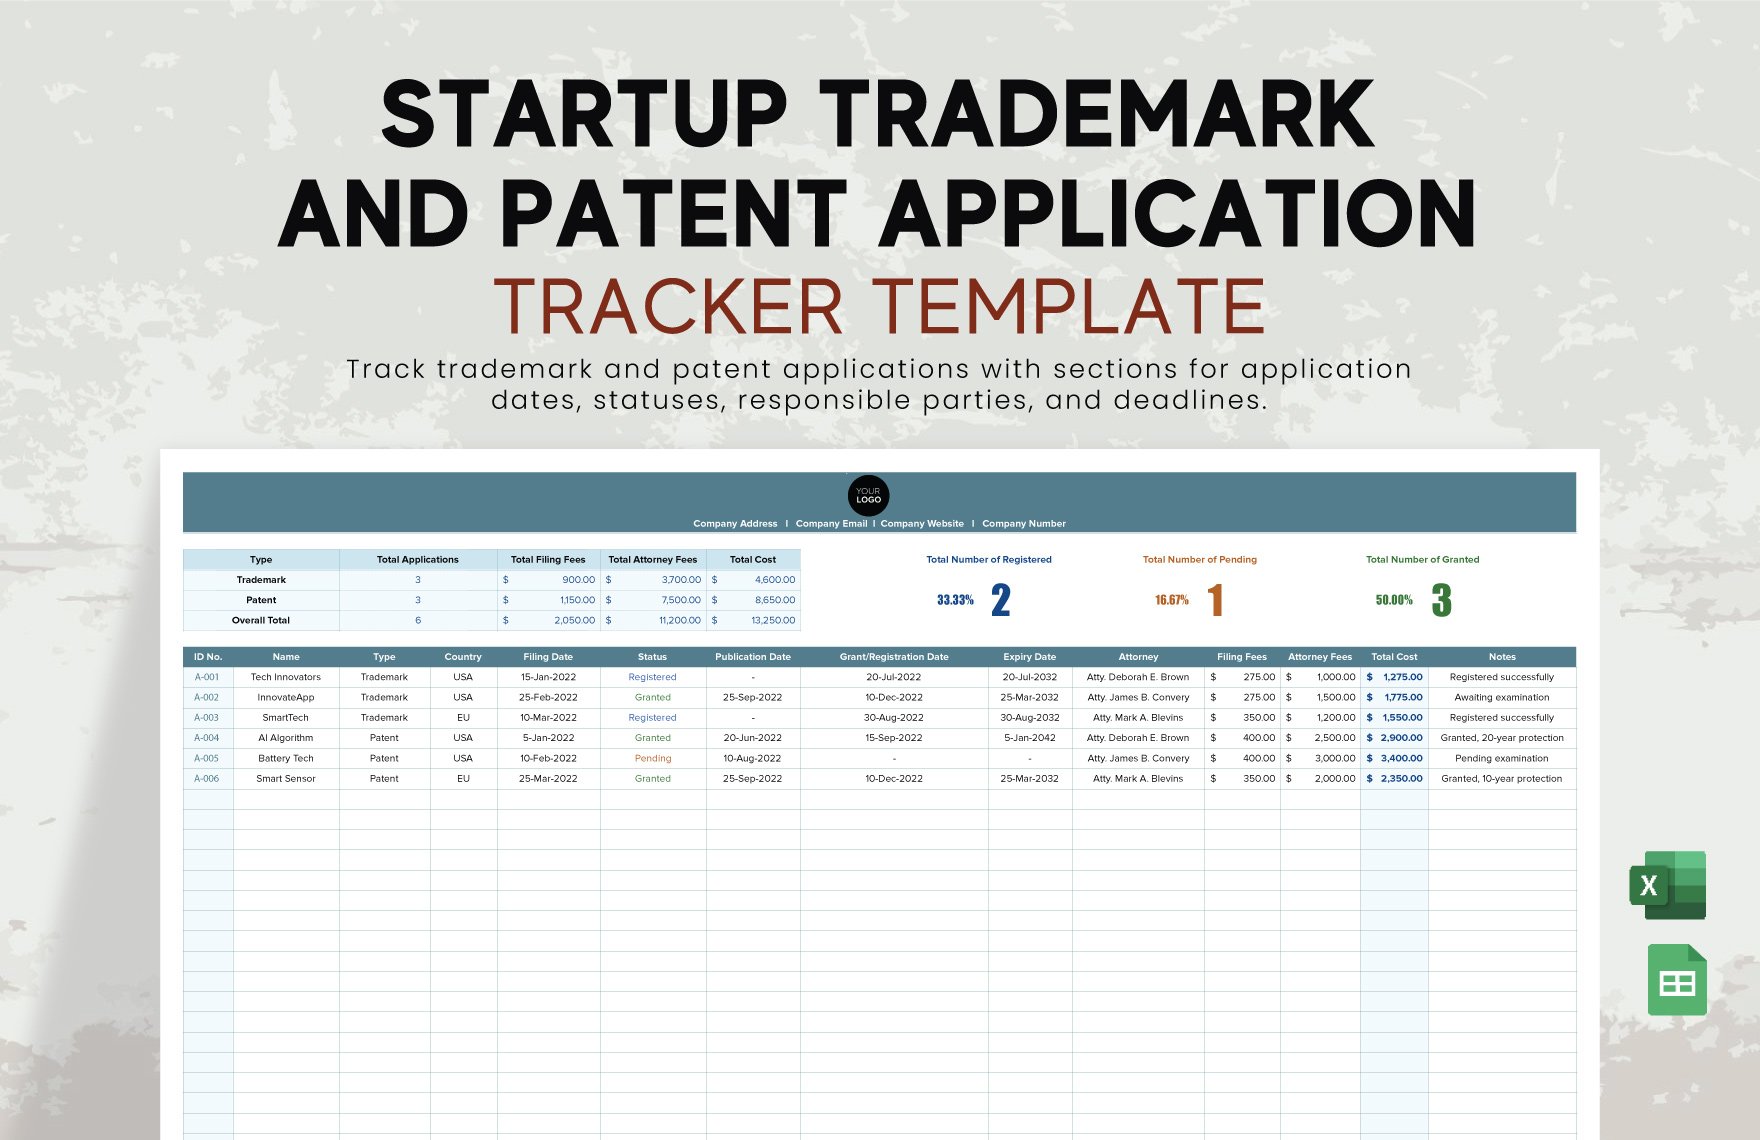 Startup Trademark and Patent Application Tracker Template in Excel, Google Sheets